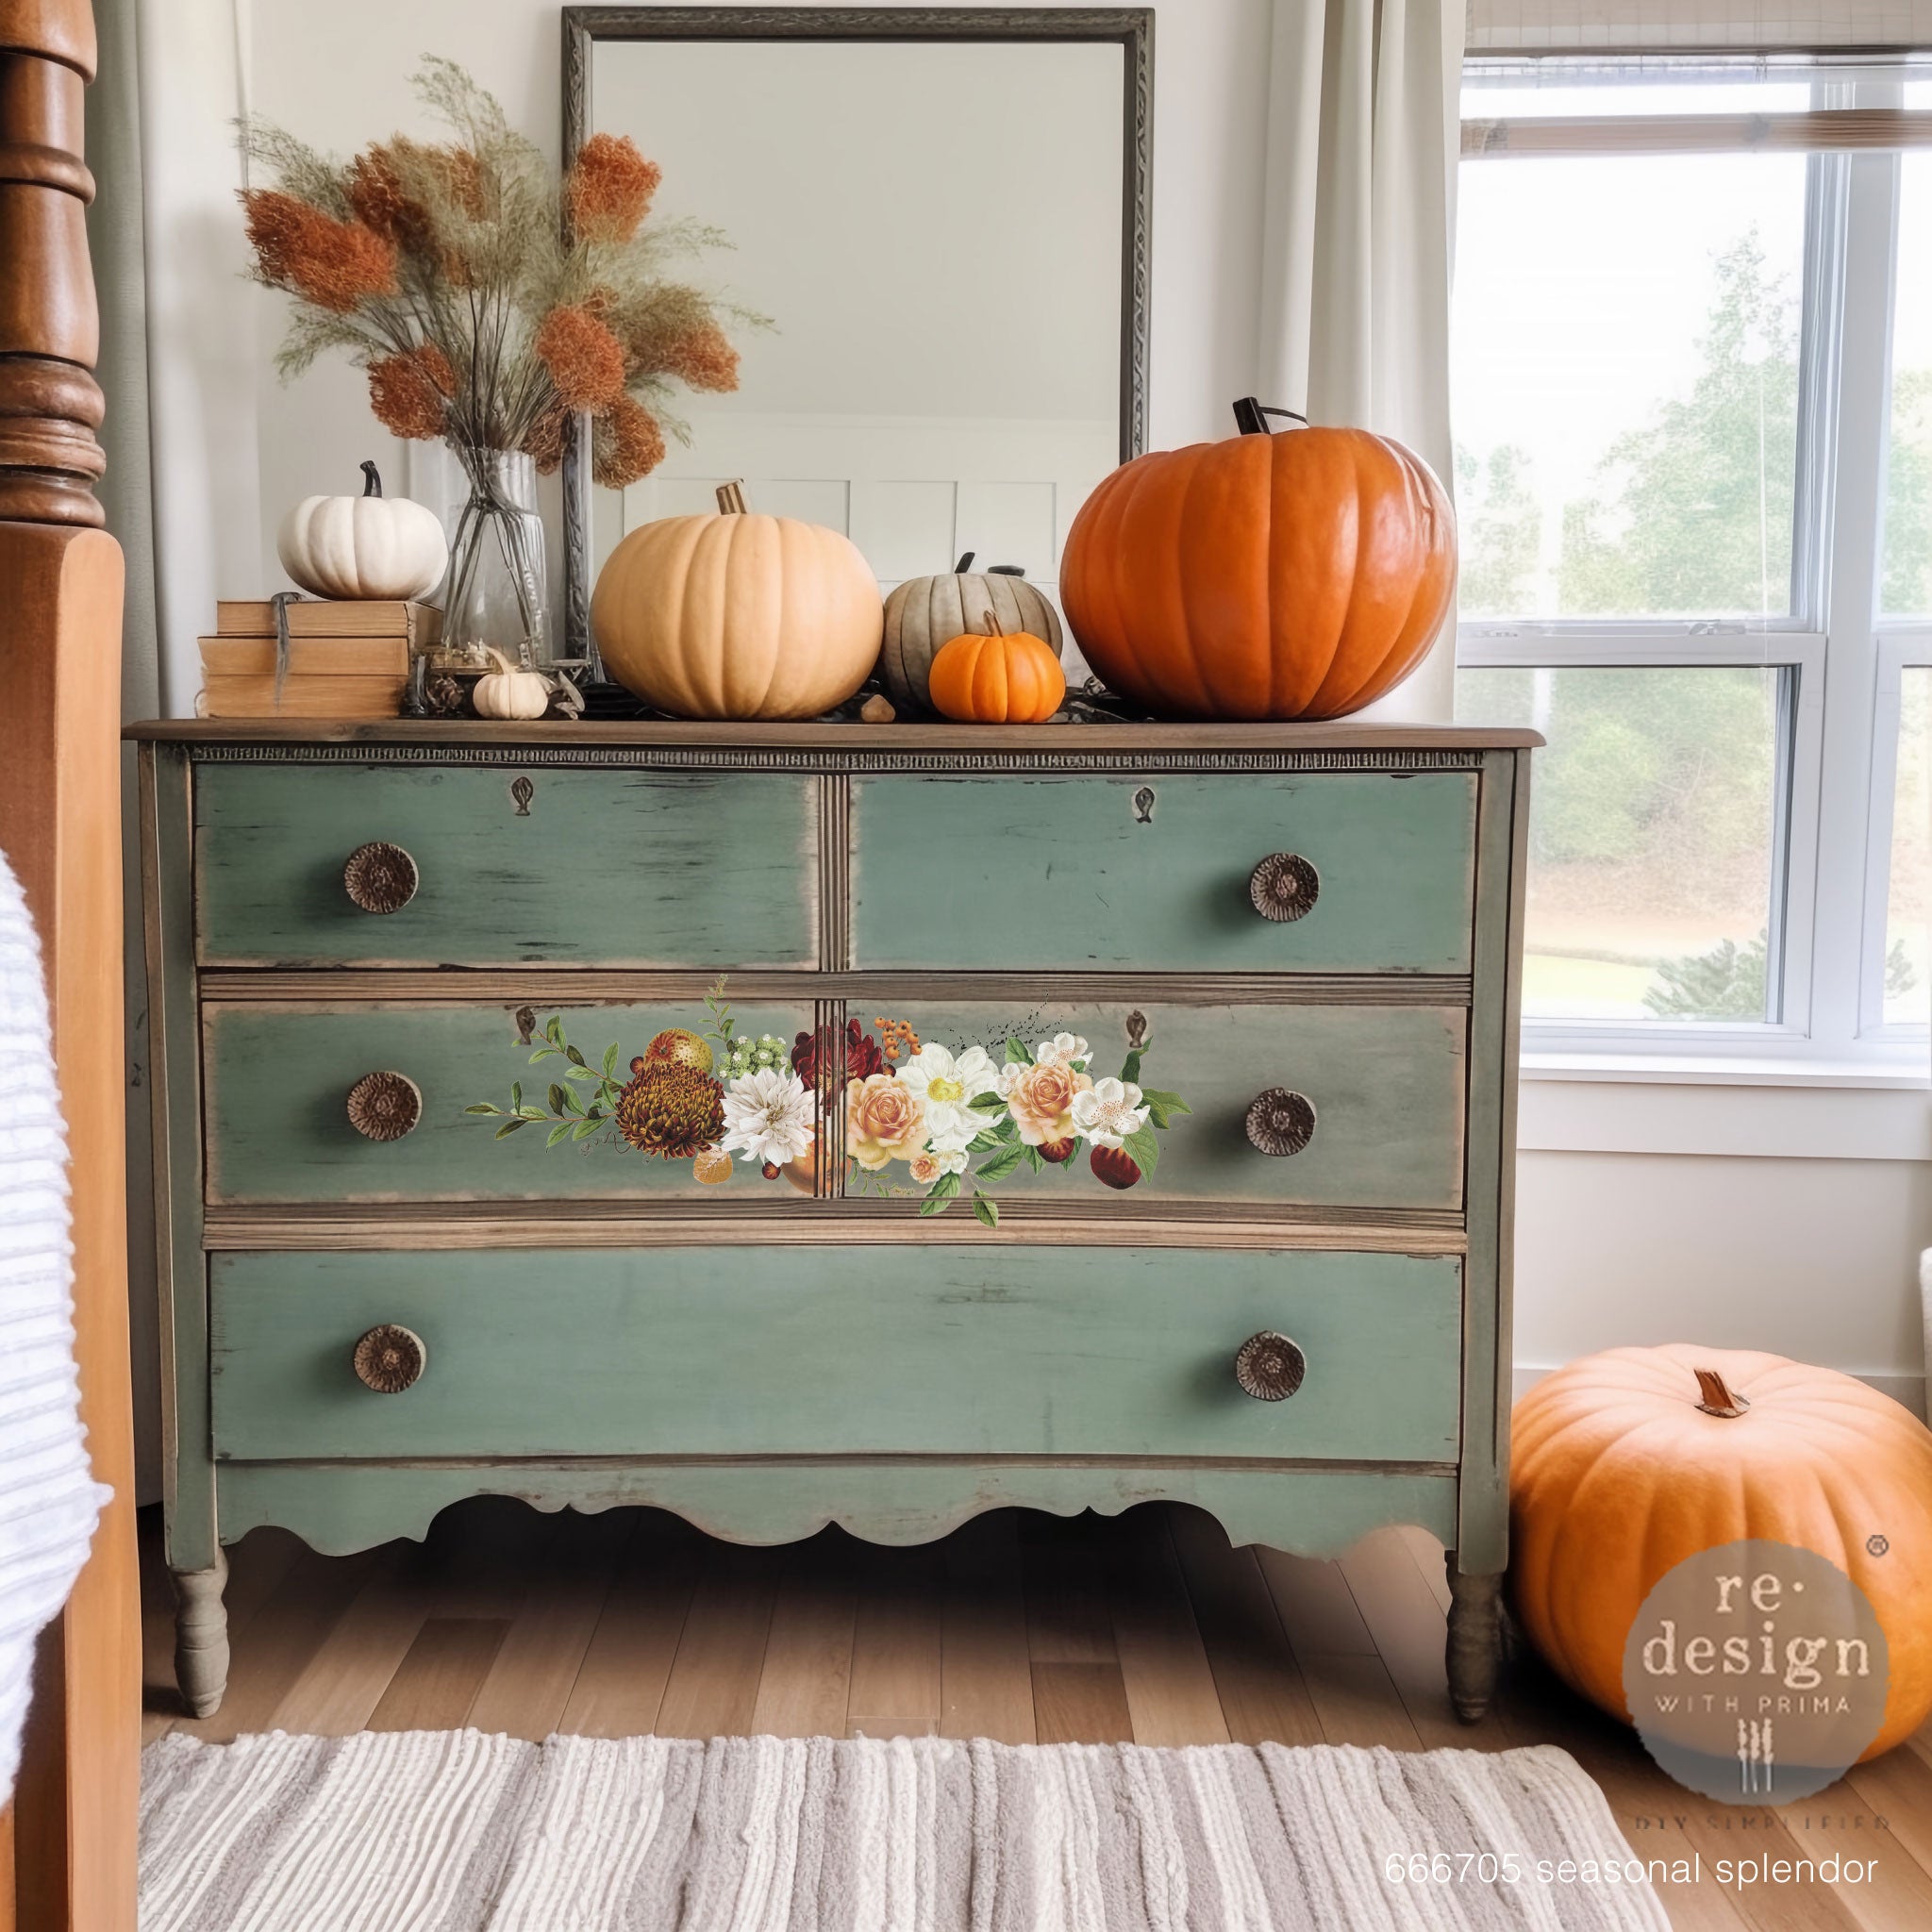 A vintage dreser is painted a soft green and features ReDesign with Prima's Seasonal Splendor small transfer arranged into a bouquet in the center of the front of the dresser.